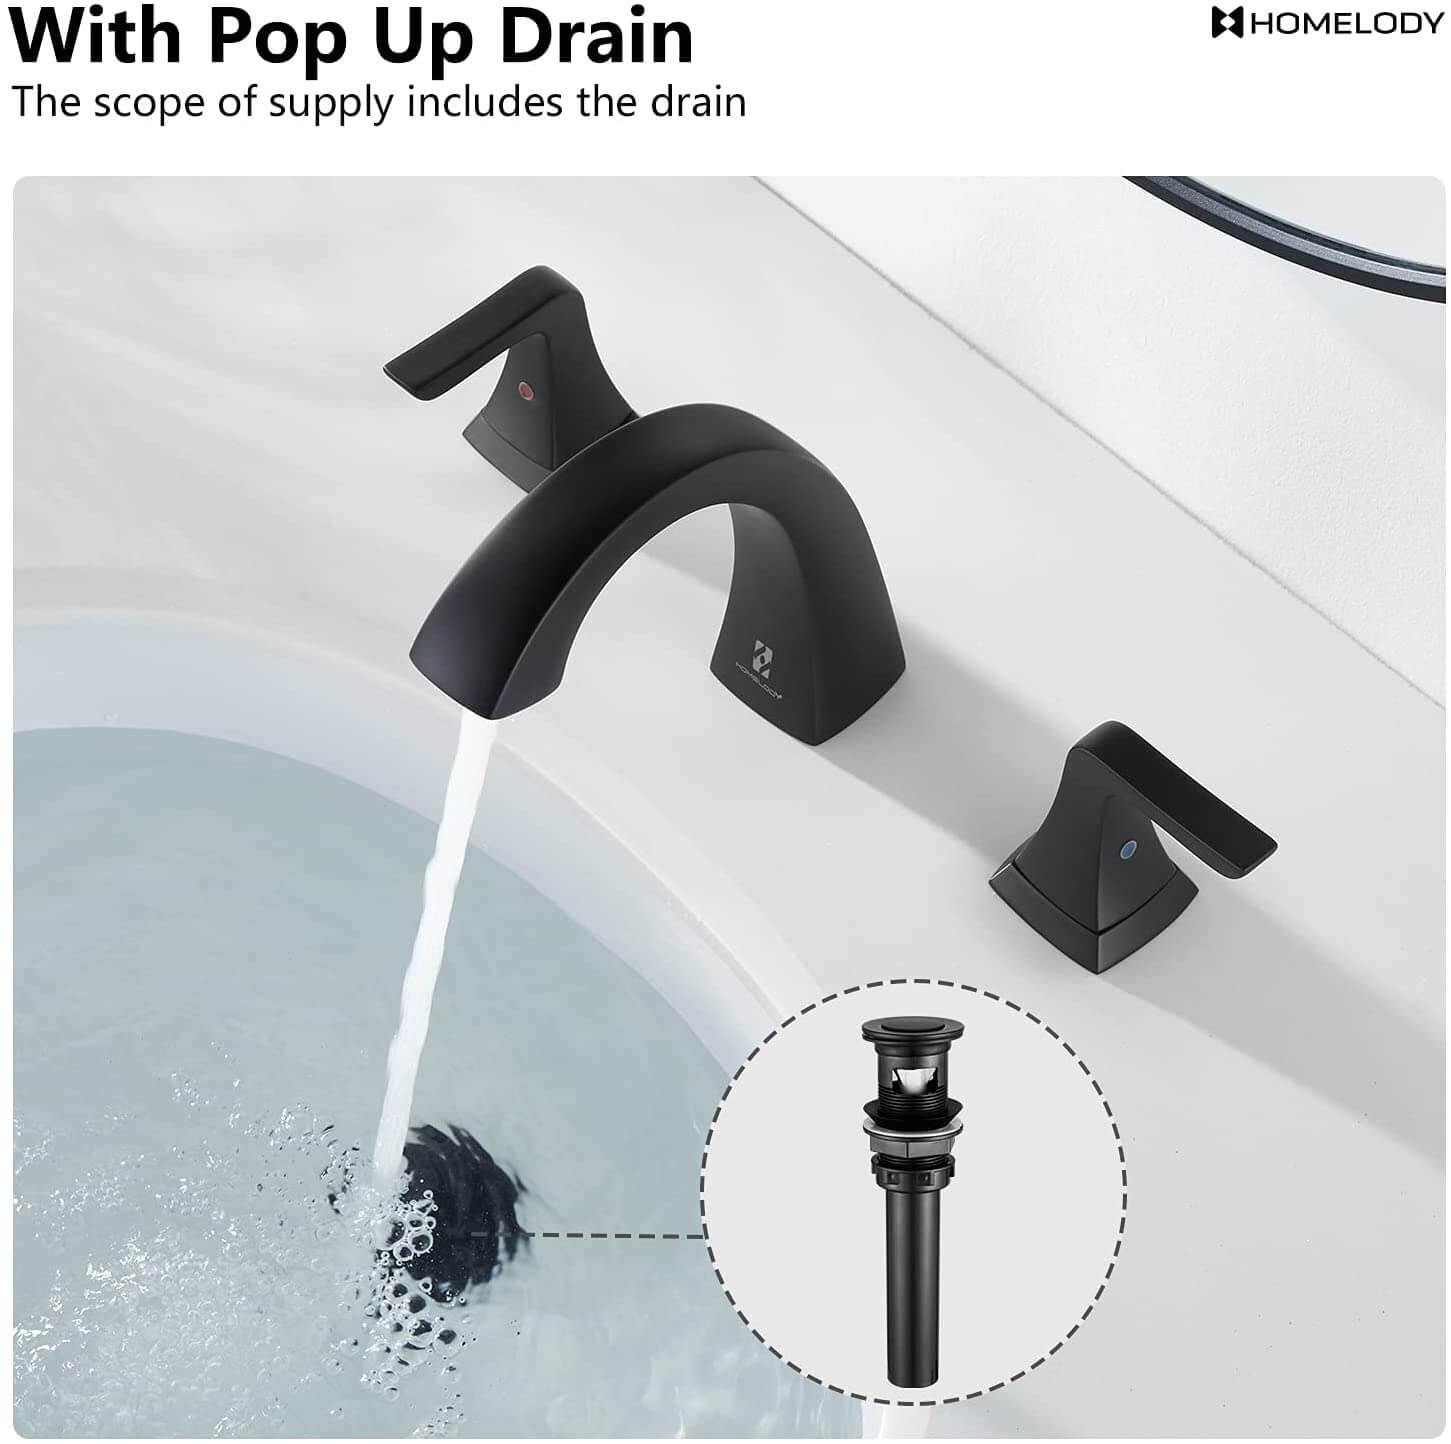 HOMELODY Matte Black Bathroom Faucet for 3 Hole - Homelody